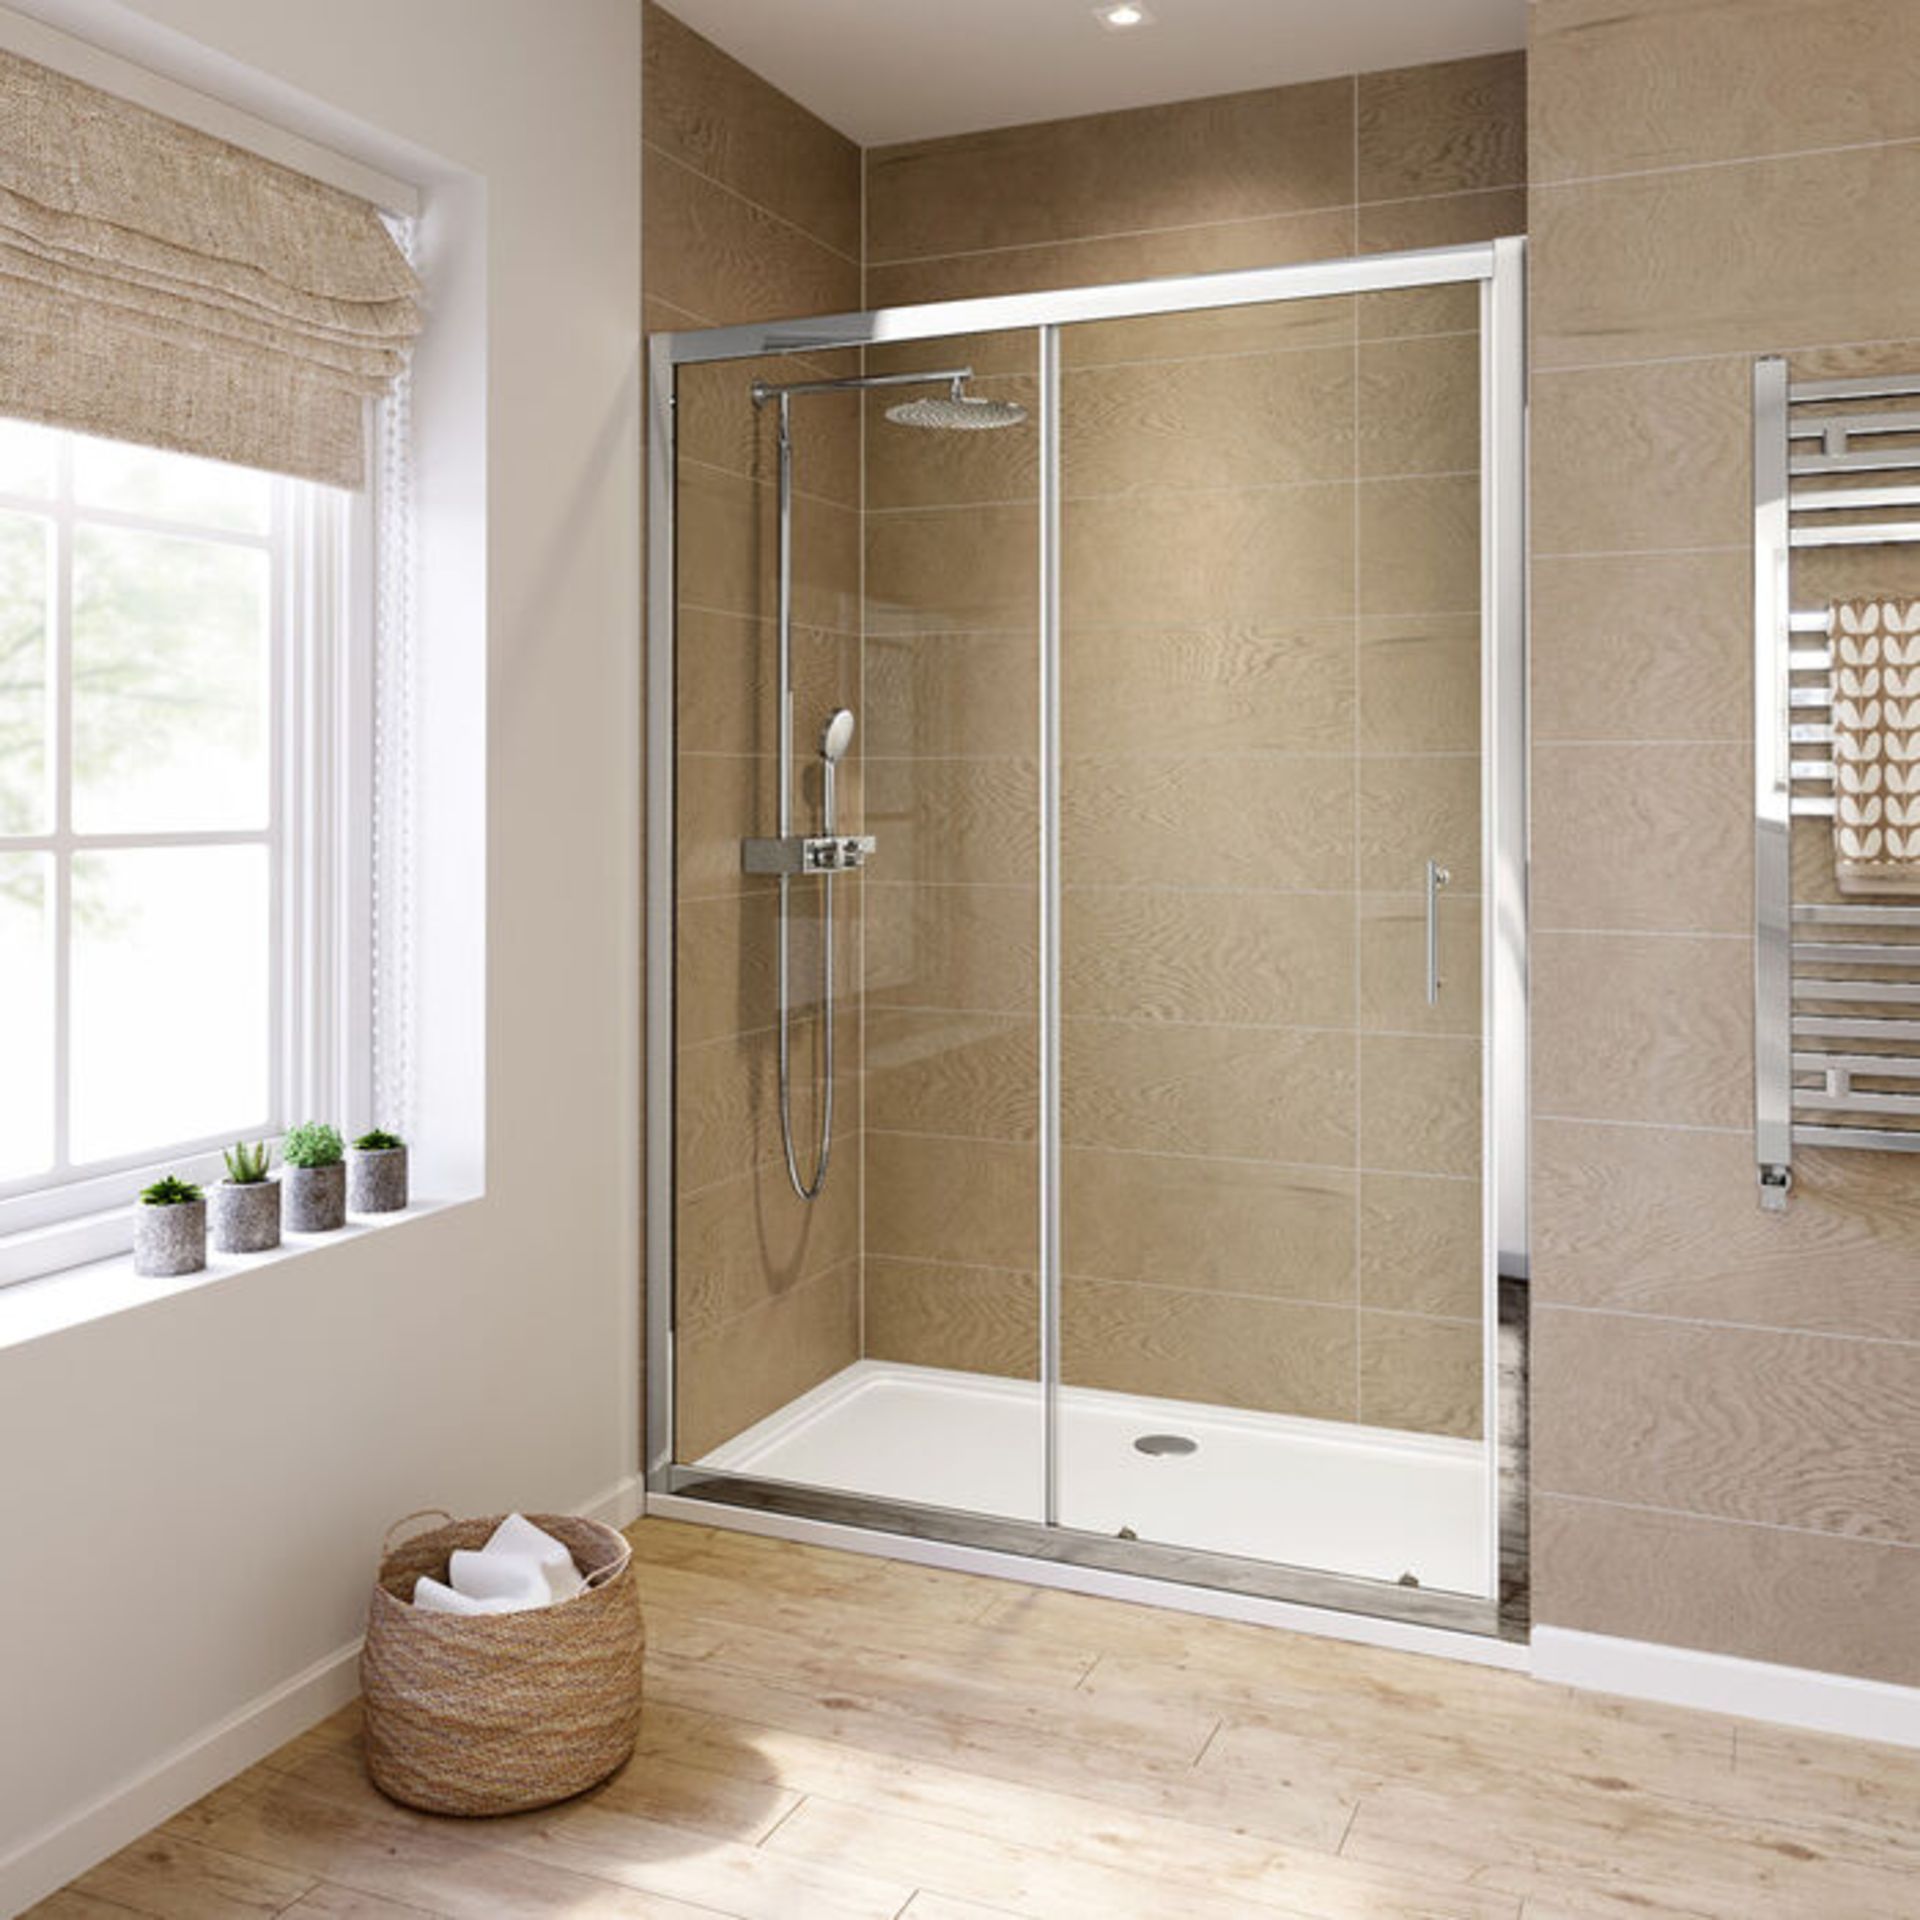 NEW & BOXED 1700mm - 6mm - Elements Sliding Shower Door. RRP £299.99.6mm Safety Glass Fully - Image 3 of 3